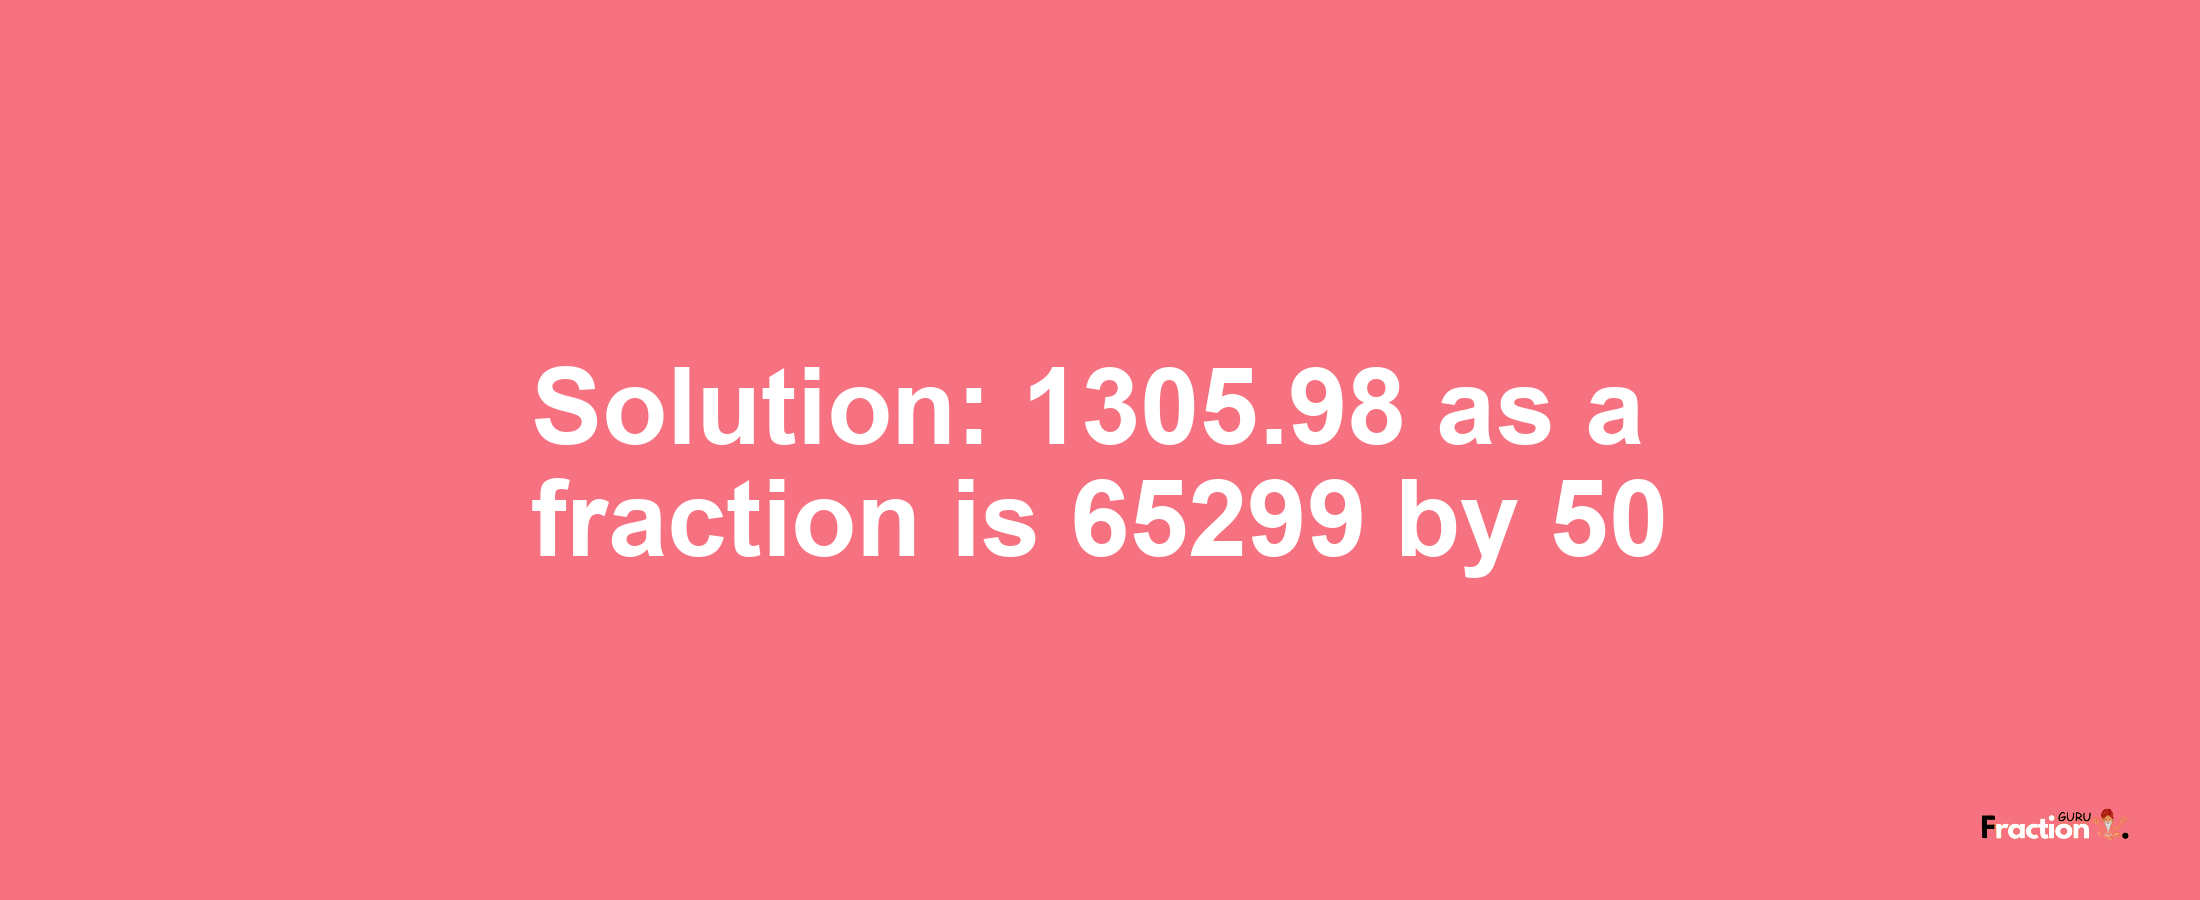 Solution:1305.98 as a fraction is 65299/50